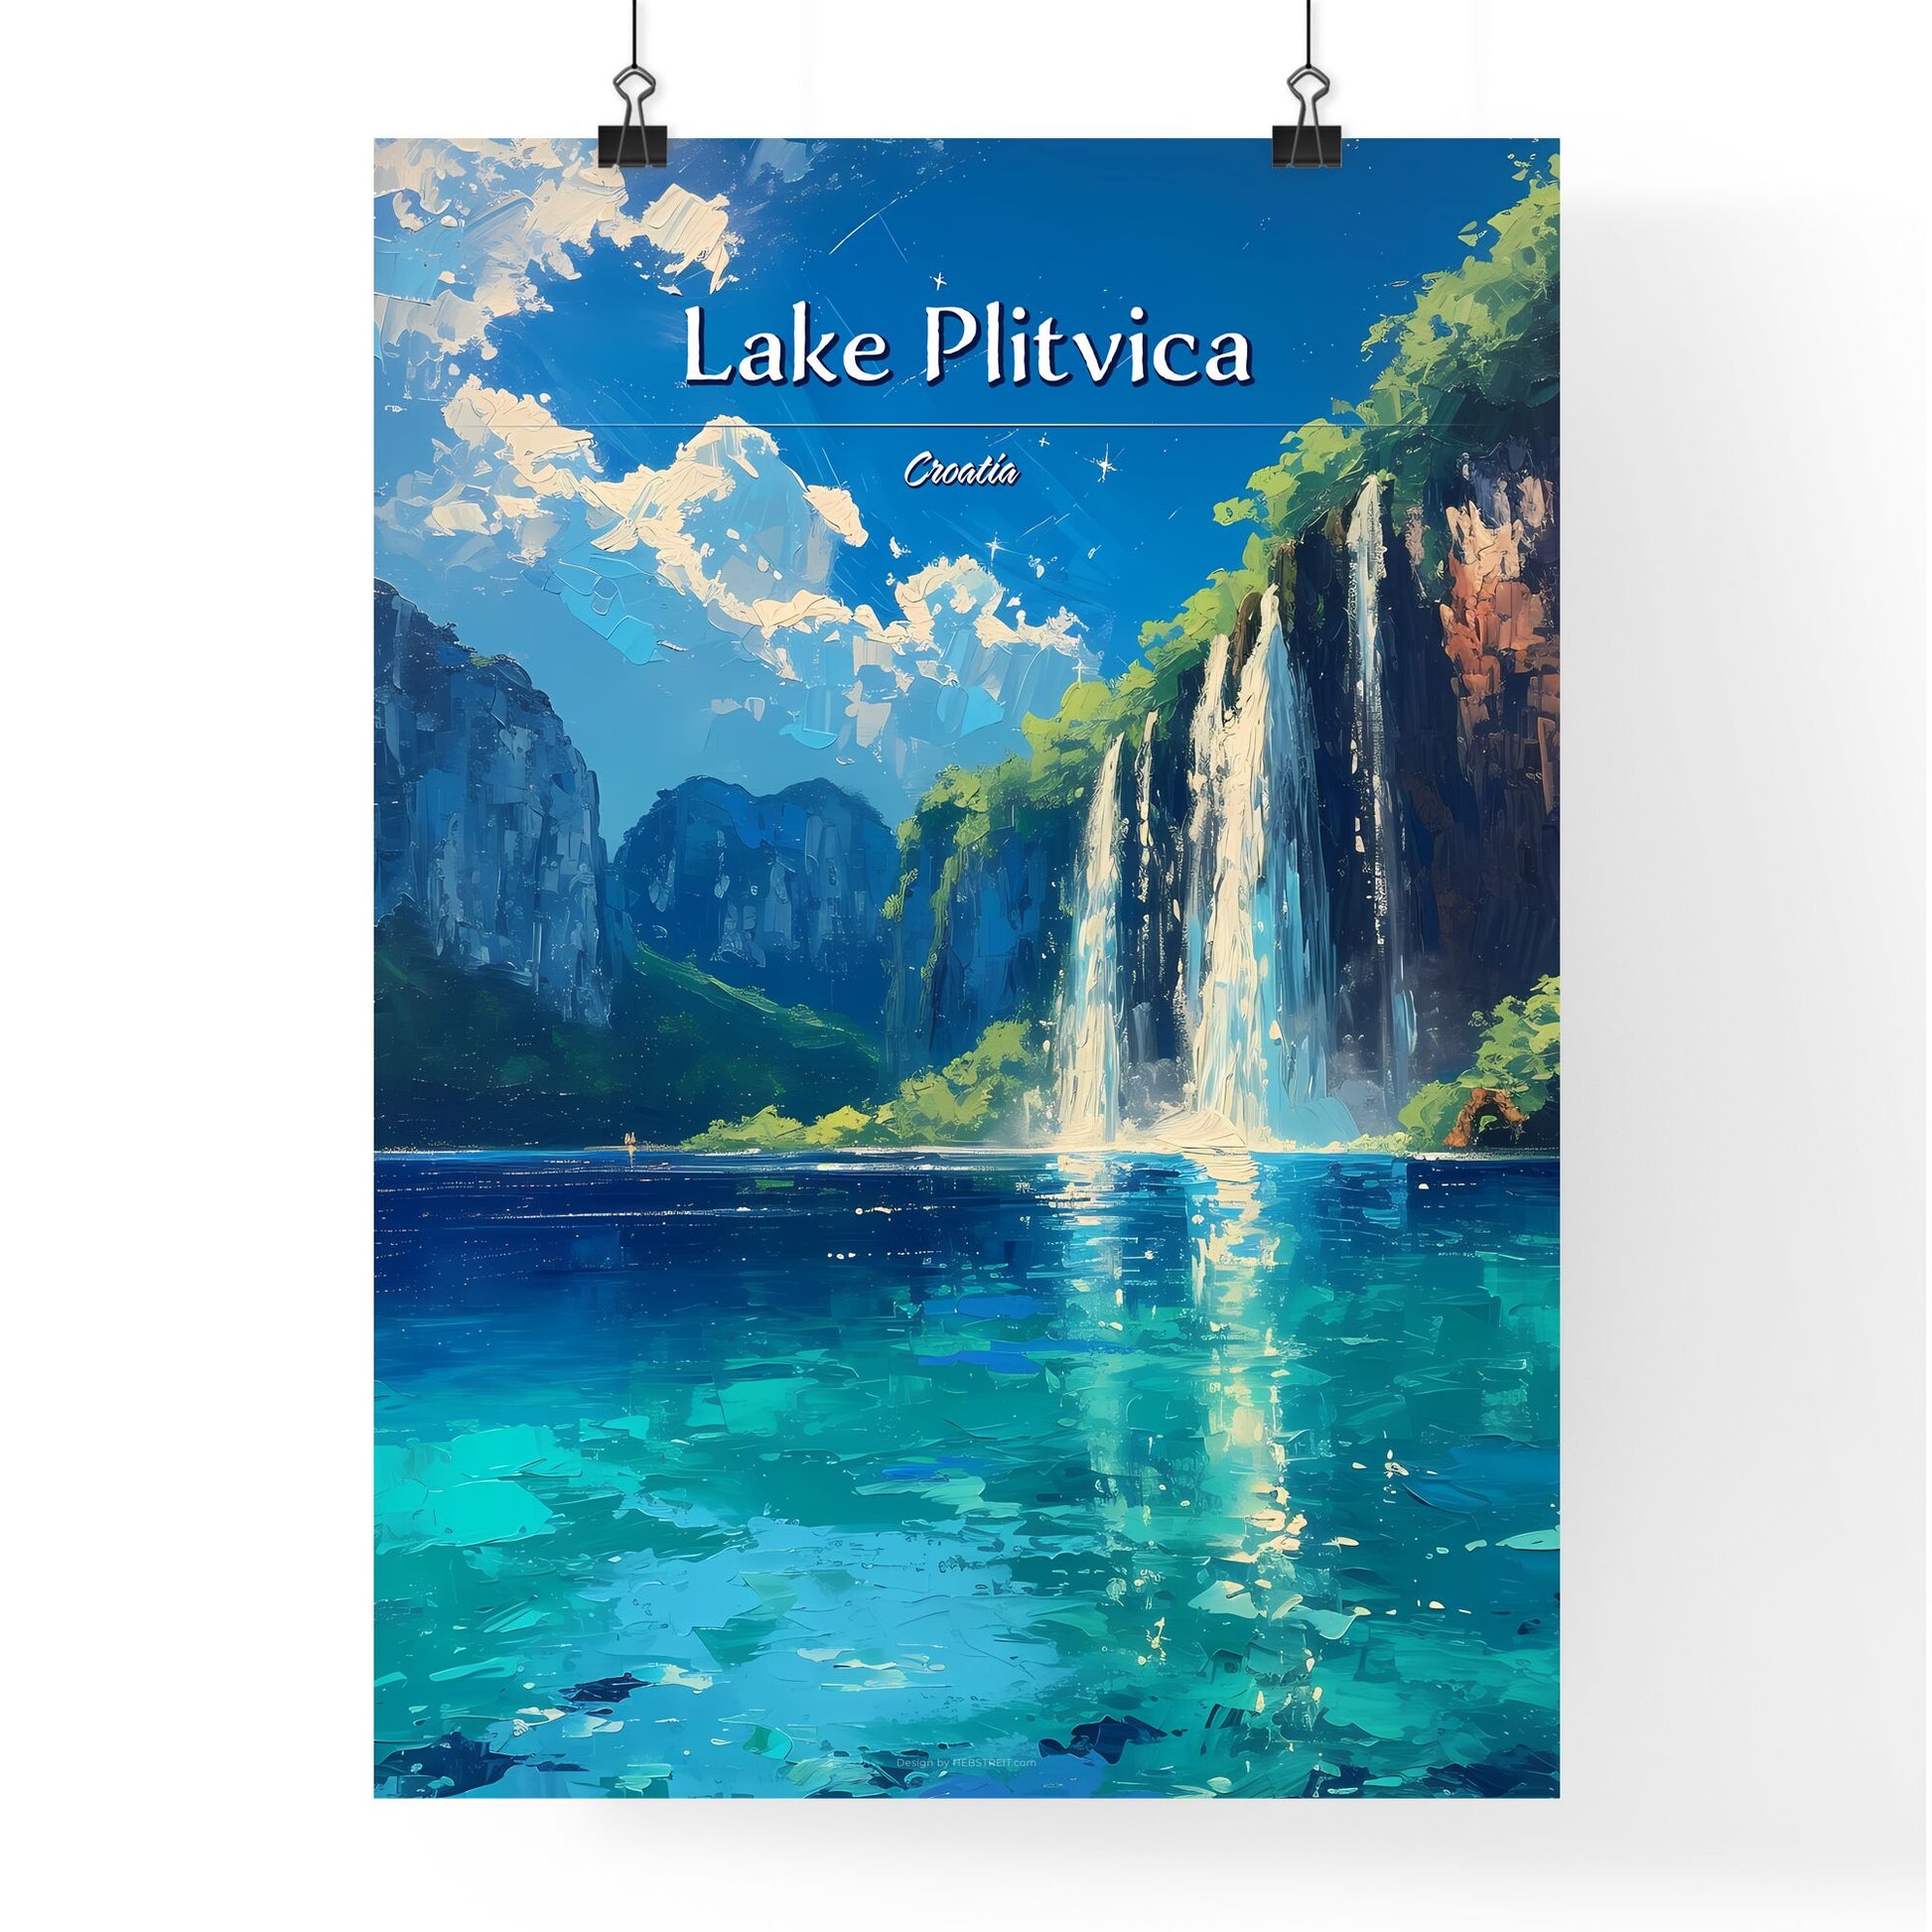 Lake Plitvica, Croatia - Art print of a waterfall in a body of water Default Title